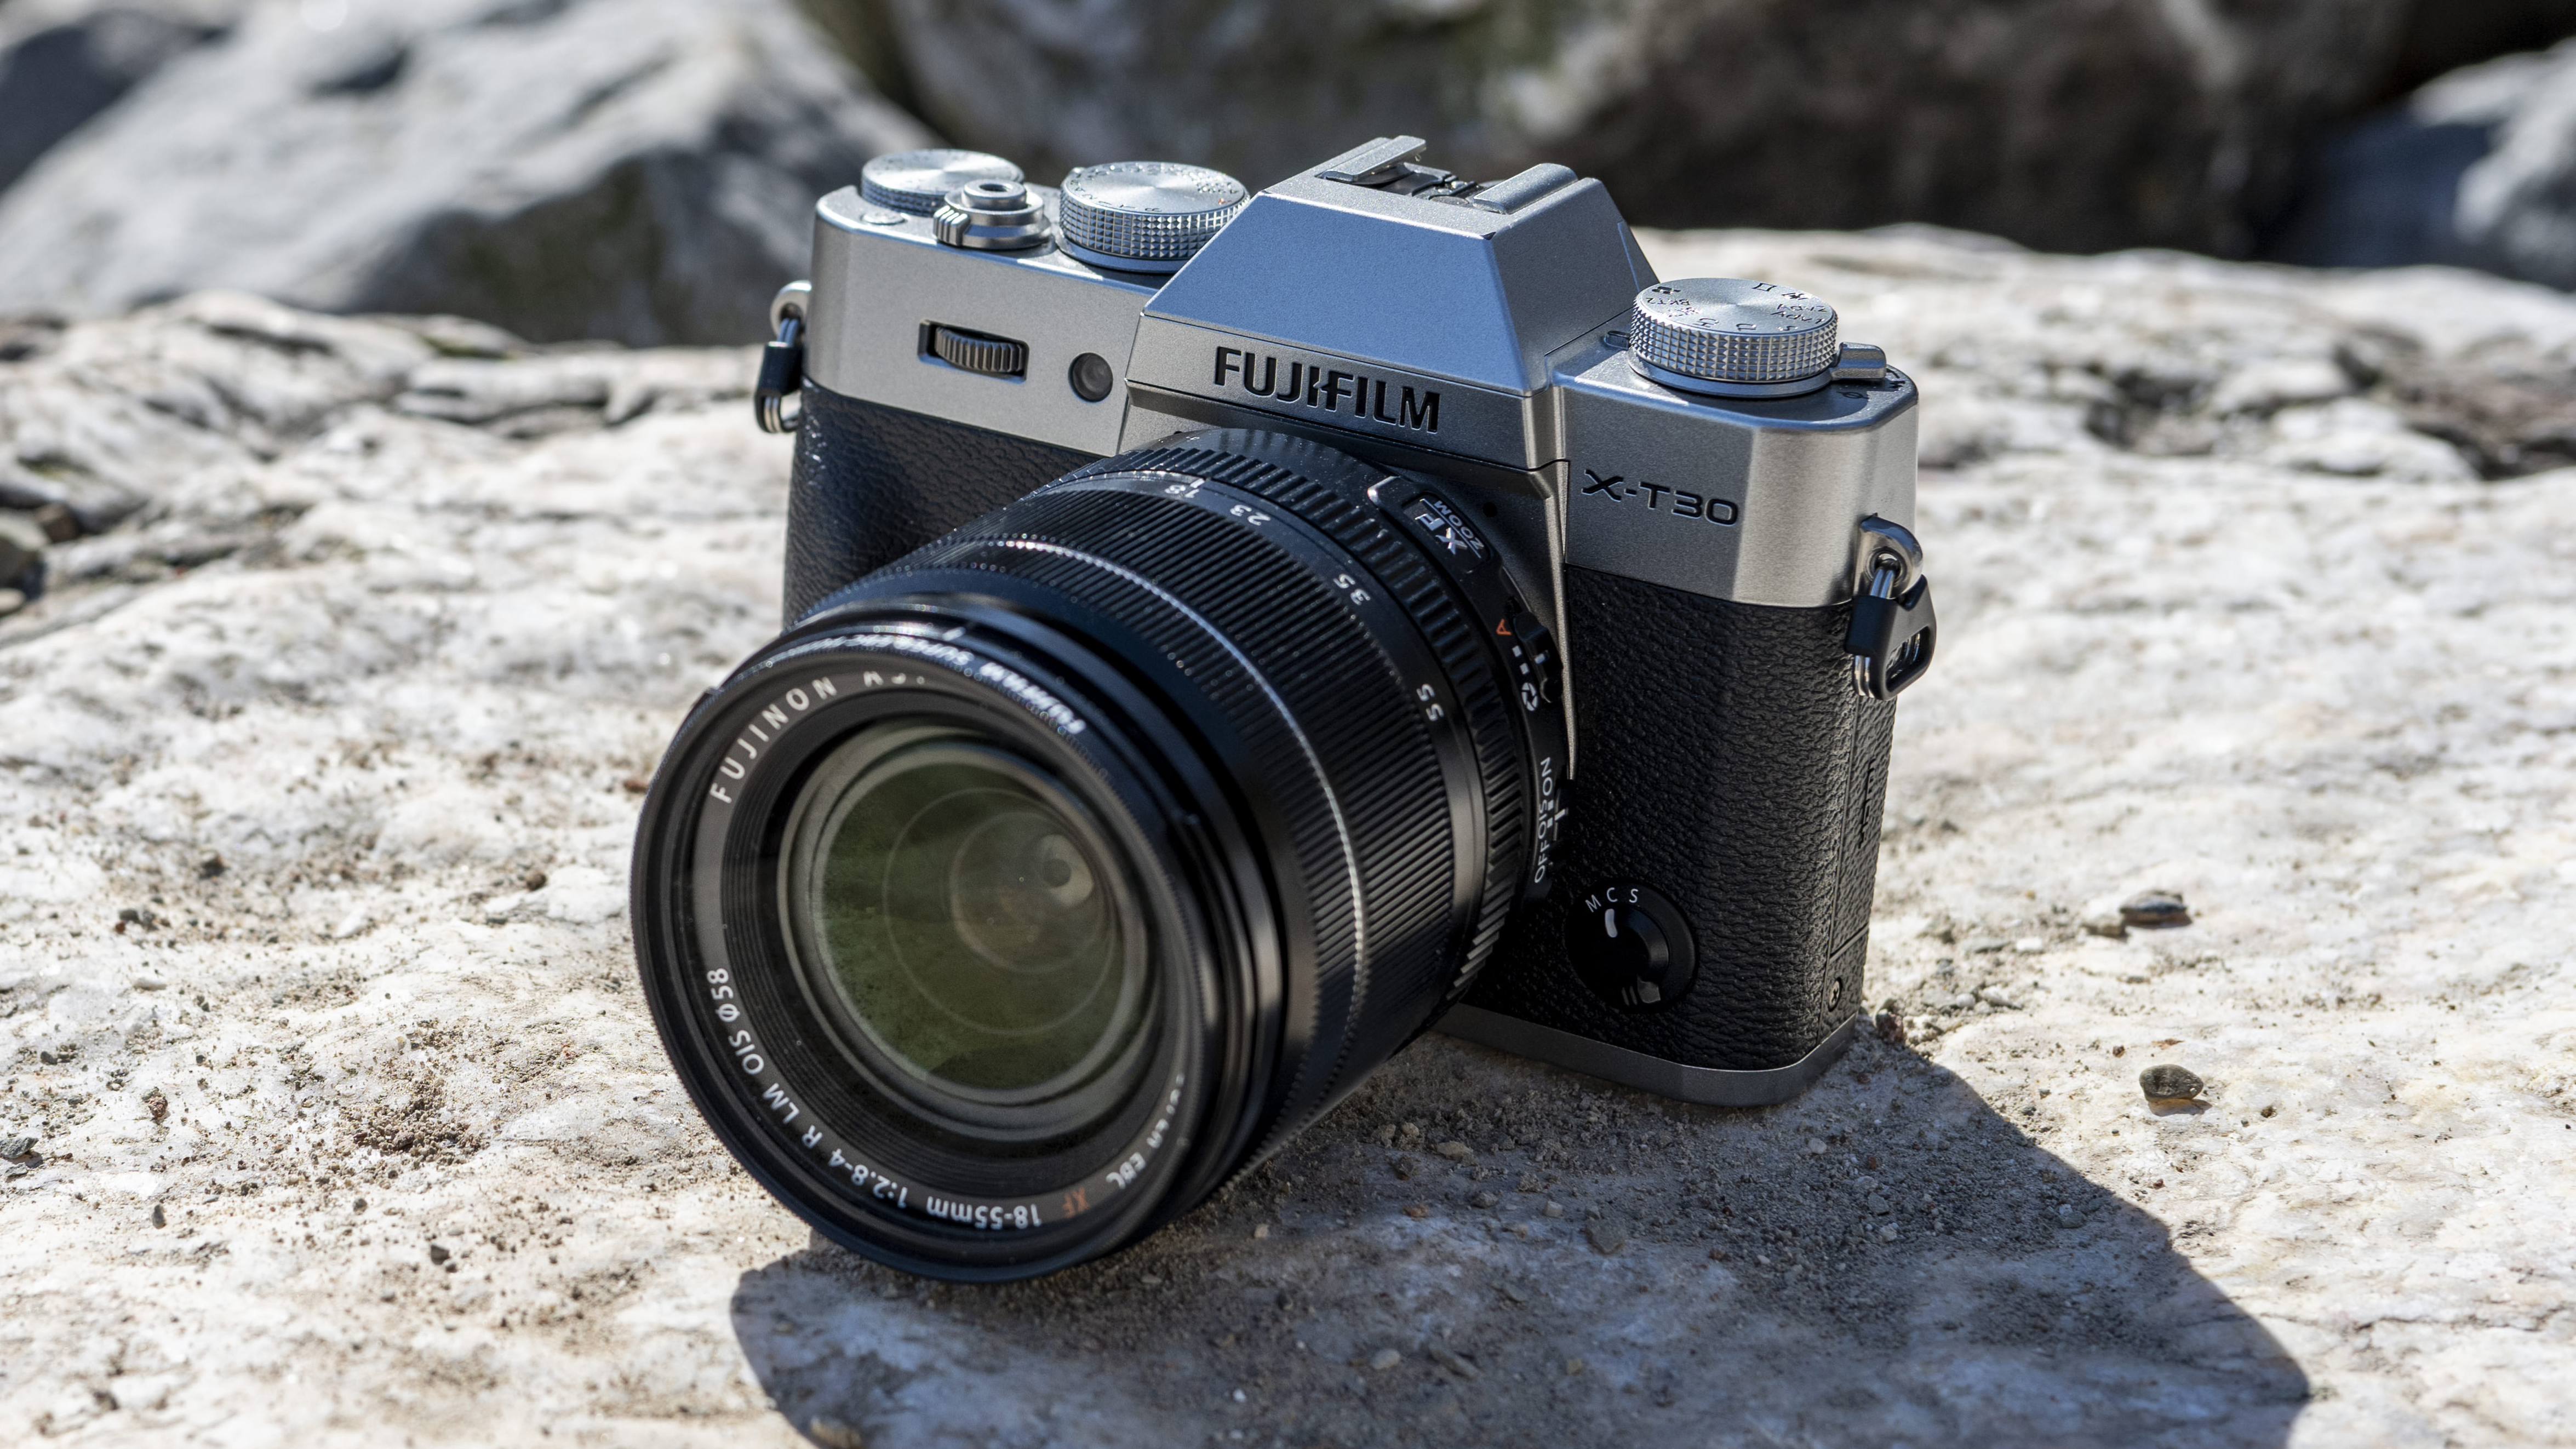 The Fujifilm X-T30 II, one of the best travel cameras, resting on a rock